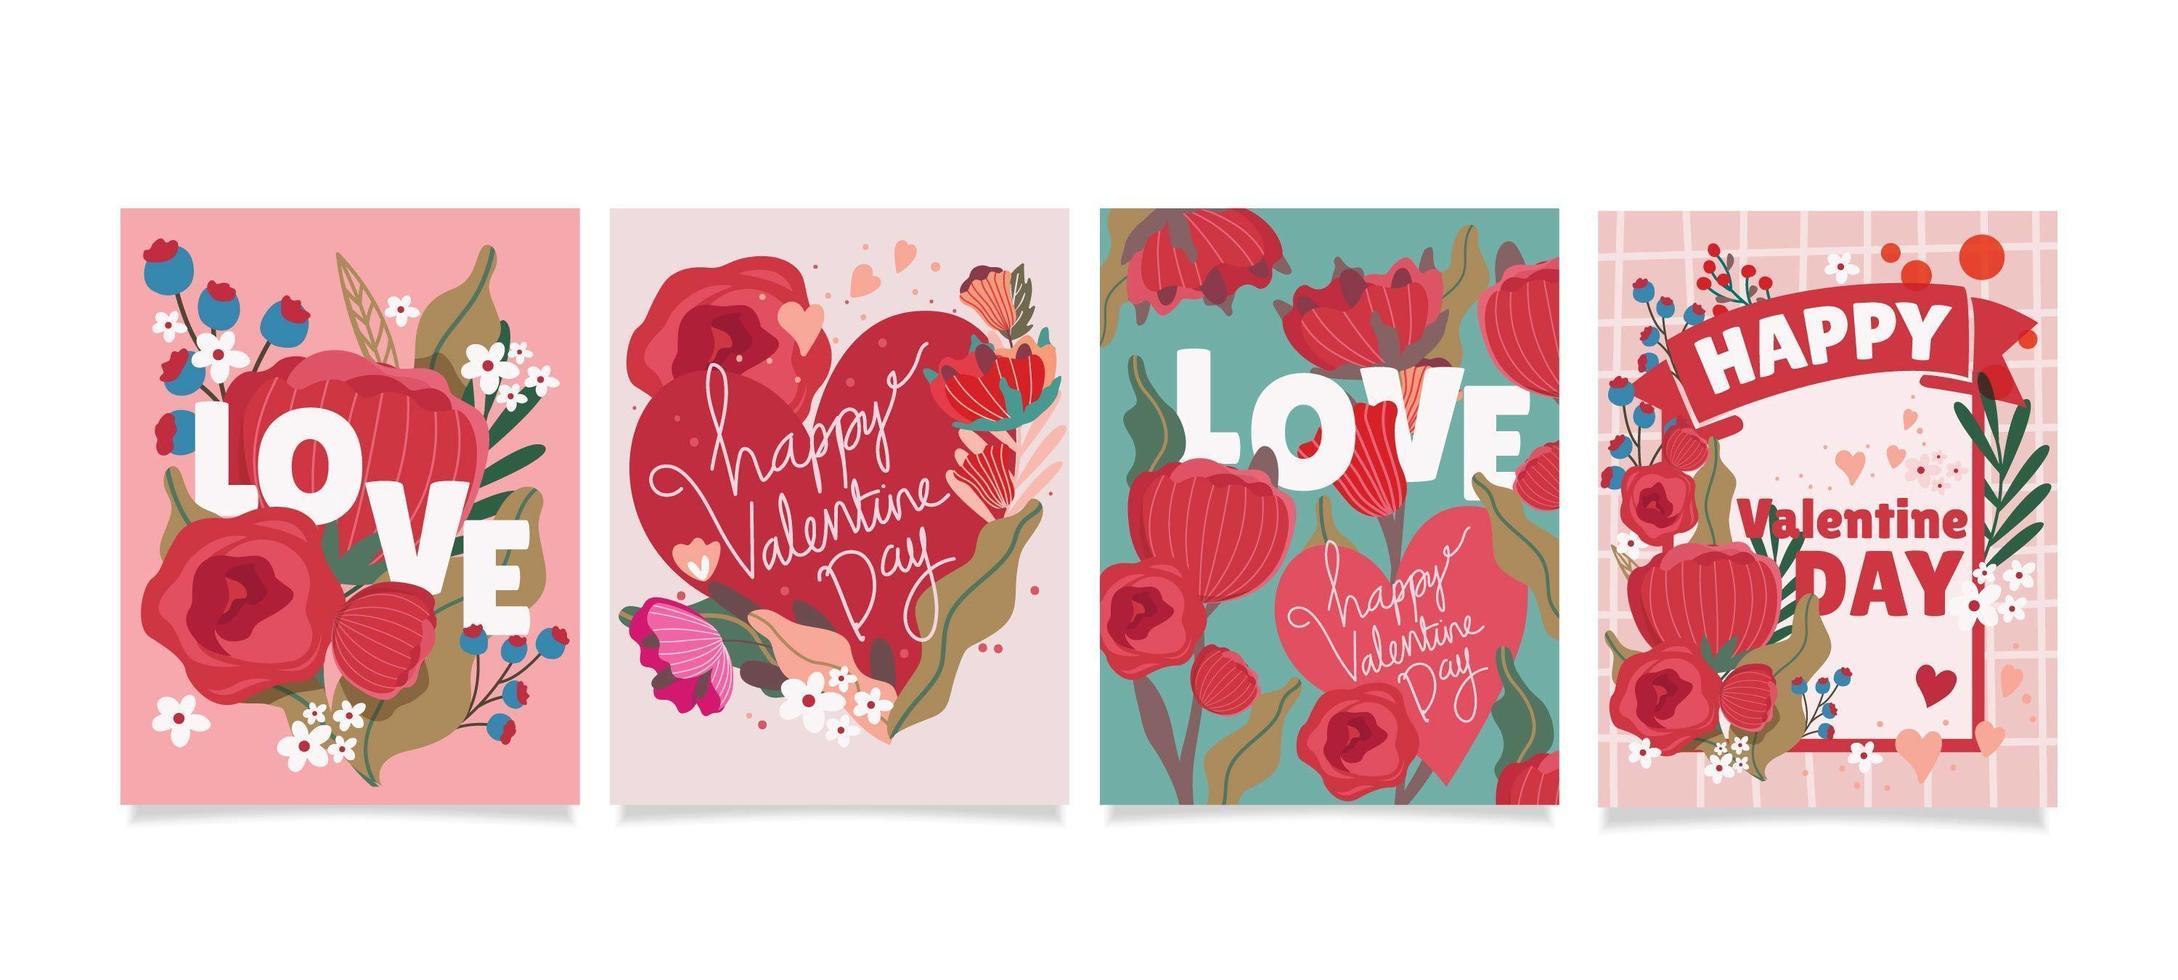 Valentine Card Concept of Heart and Flowers vector